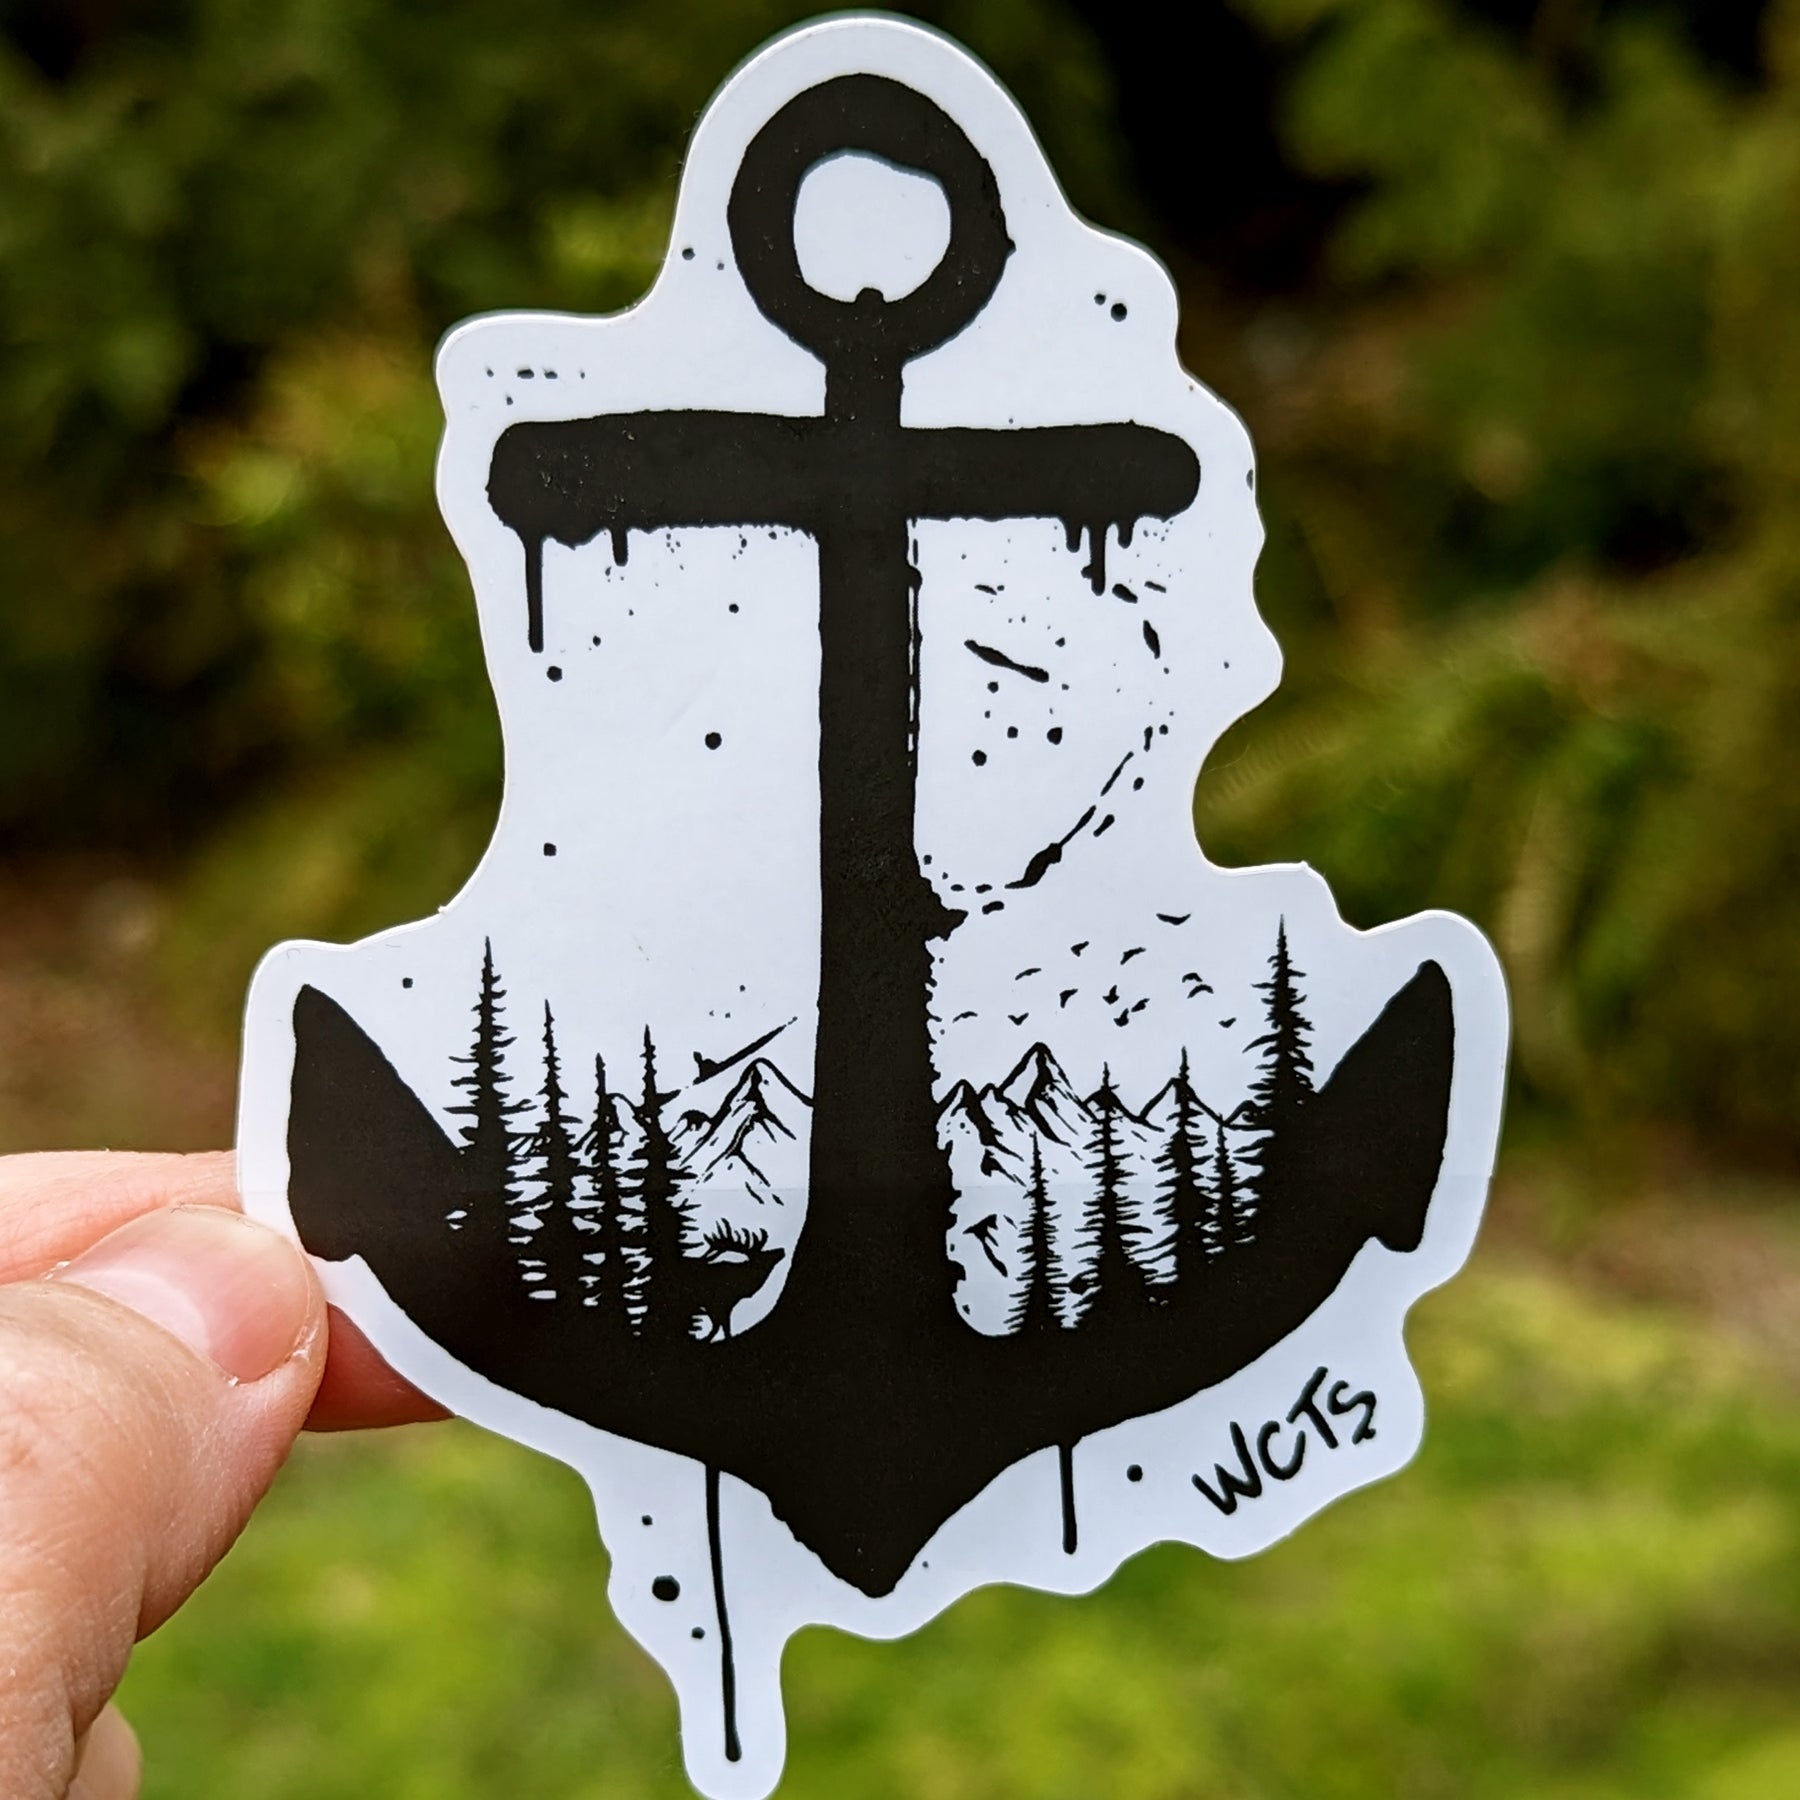 Westcoastees West Coast Anchor Sticker - Westcoastees West Coast Anchor Sticker -  - House of Himwitsa Native Art Gallery and Gifts